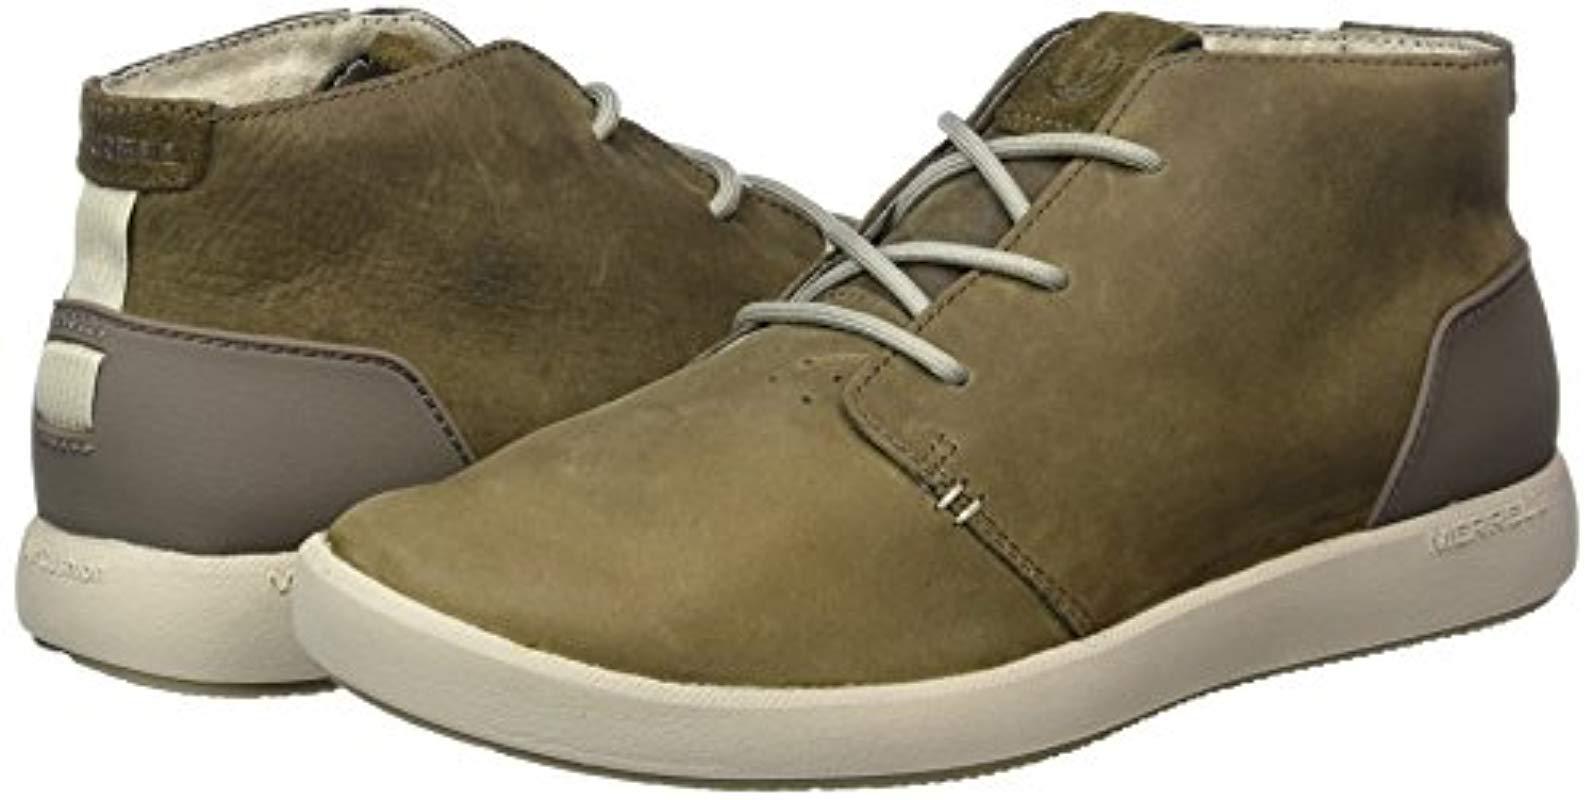 Merrell Suede 's Freewheel Chukka Boots in Green for Men - Lyst